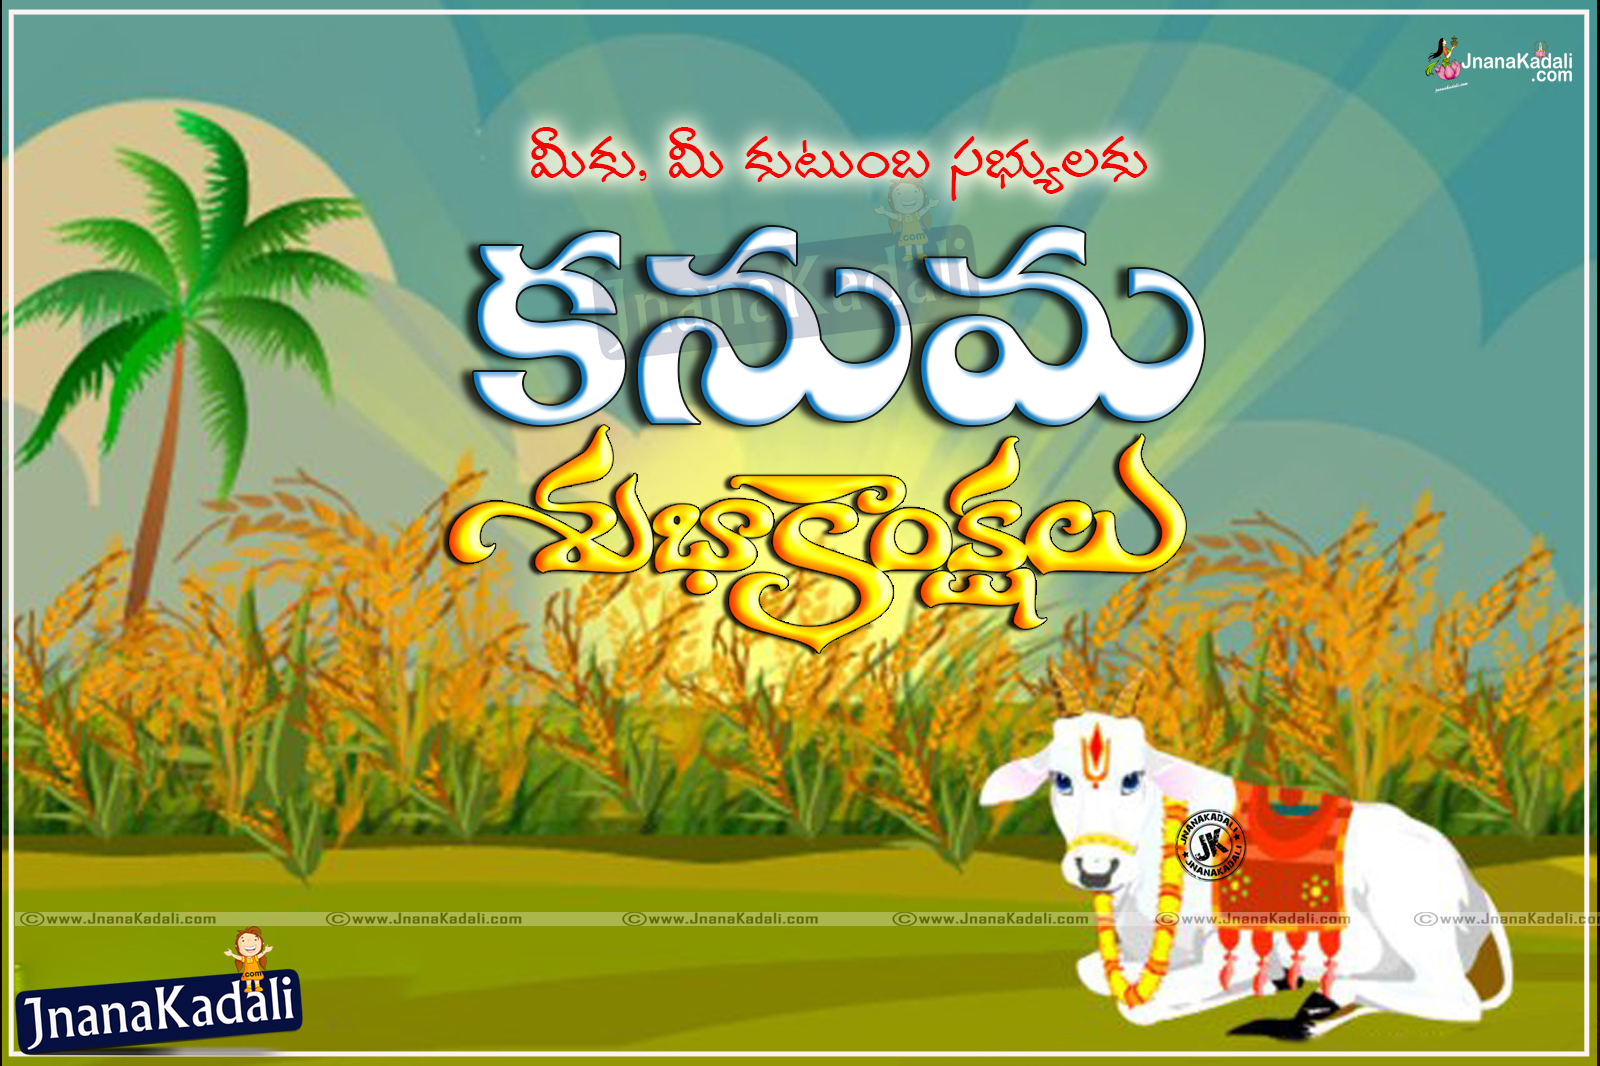 Happy Kanuma Telugu Quotations & Greetings with Pictures.